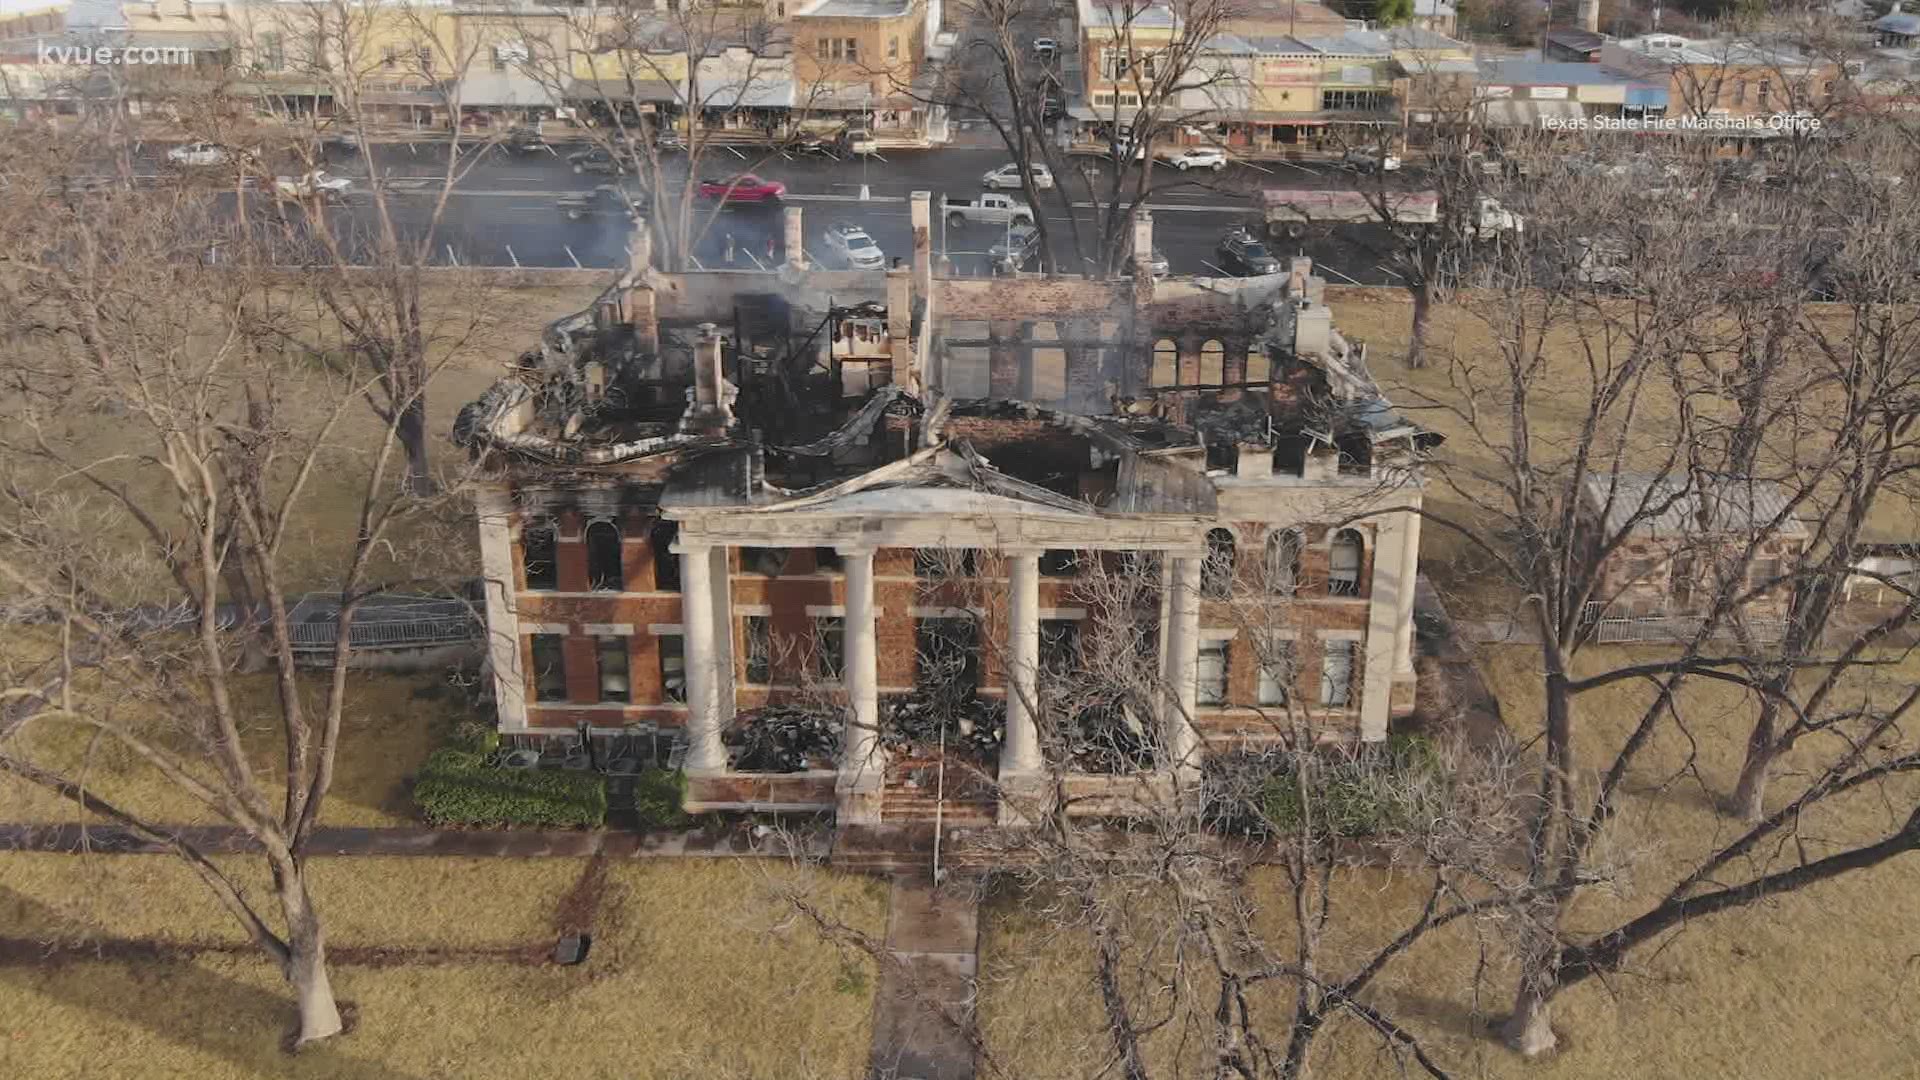 The Mason County Courthouse has been destroyed by fire. A man was arrested over the incident after leading police on a chase.